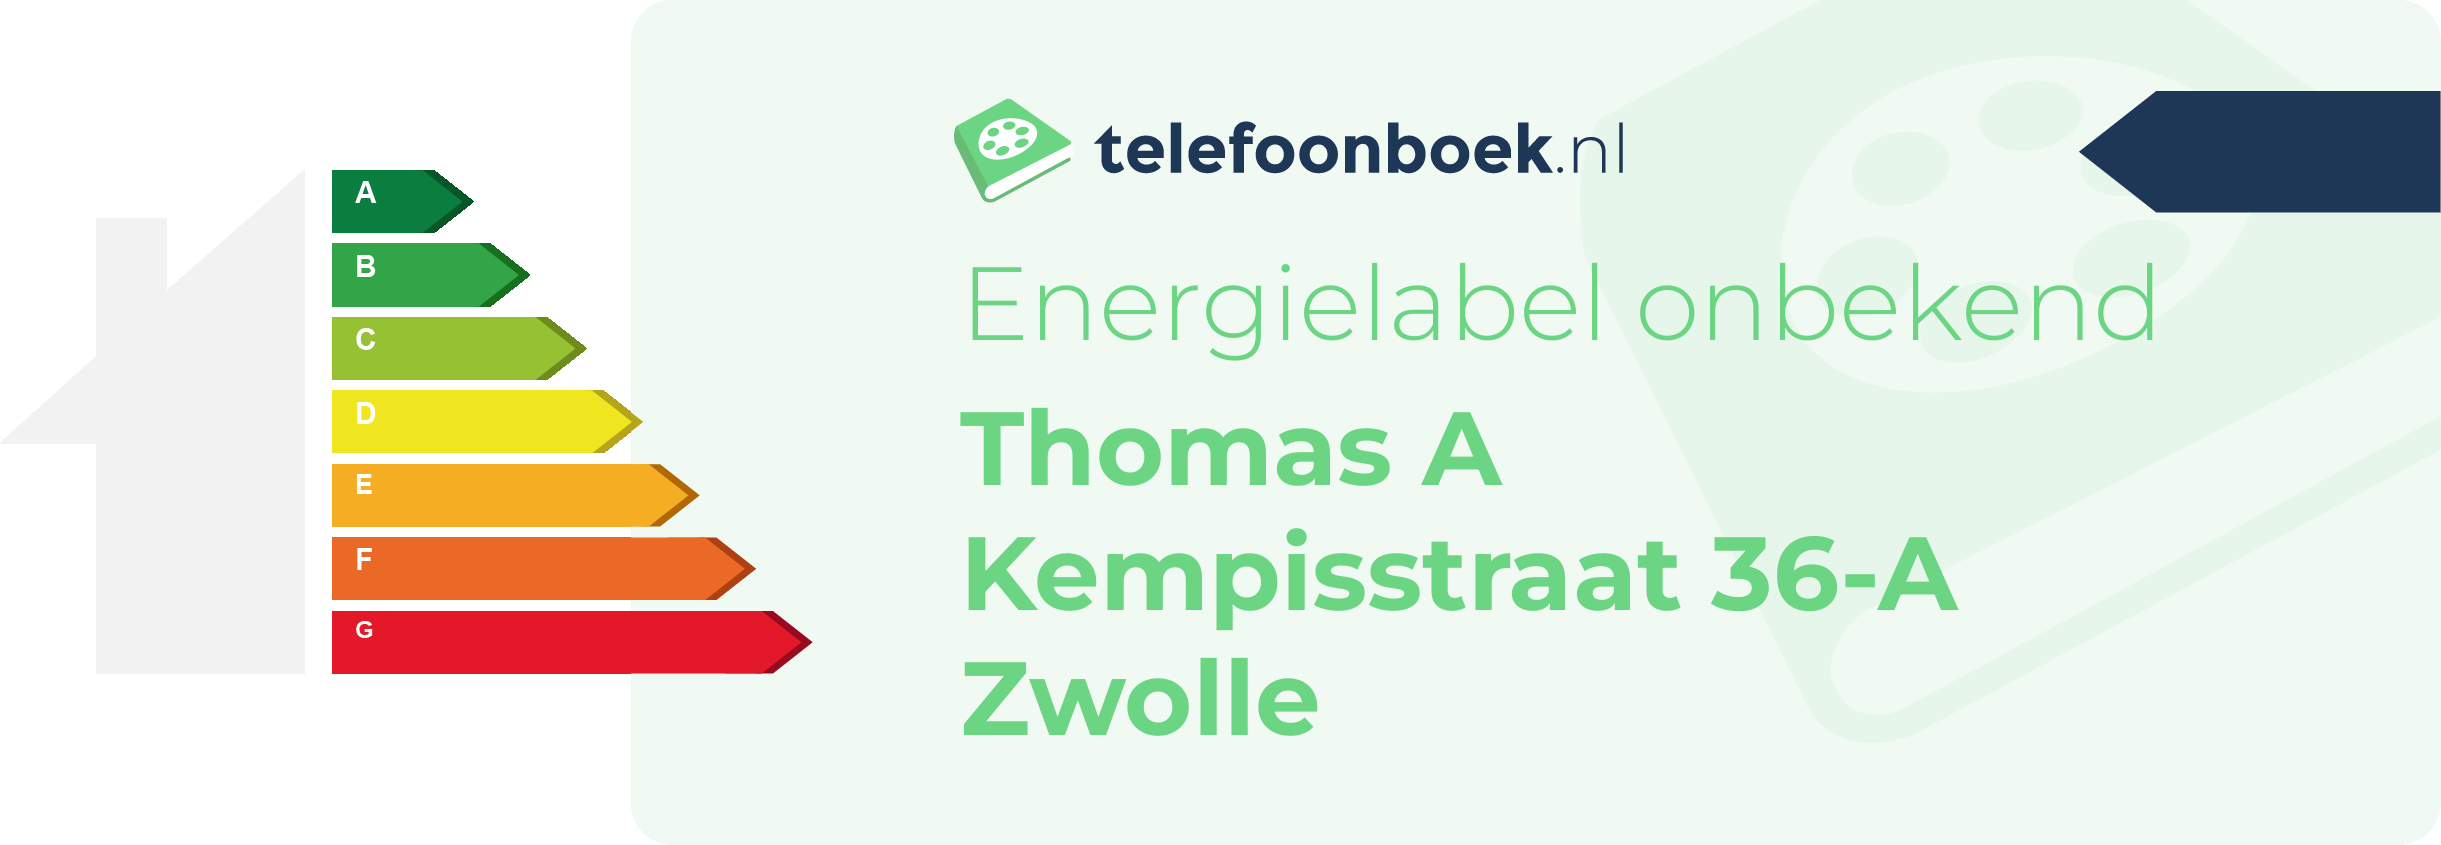 Energielabel Thomas A Kempisstraat 36-A Zwolle